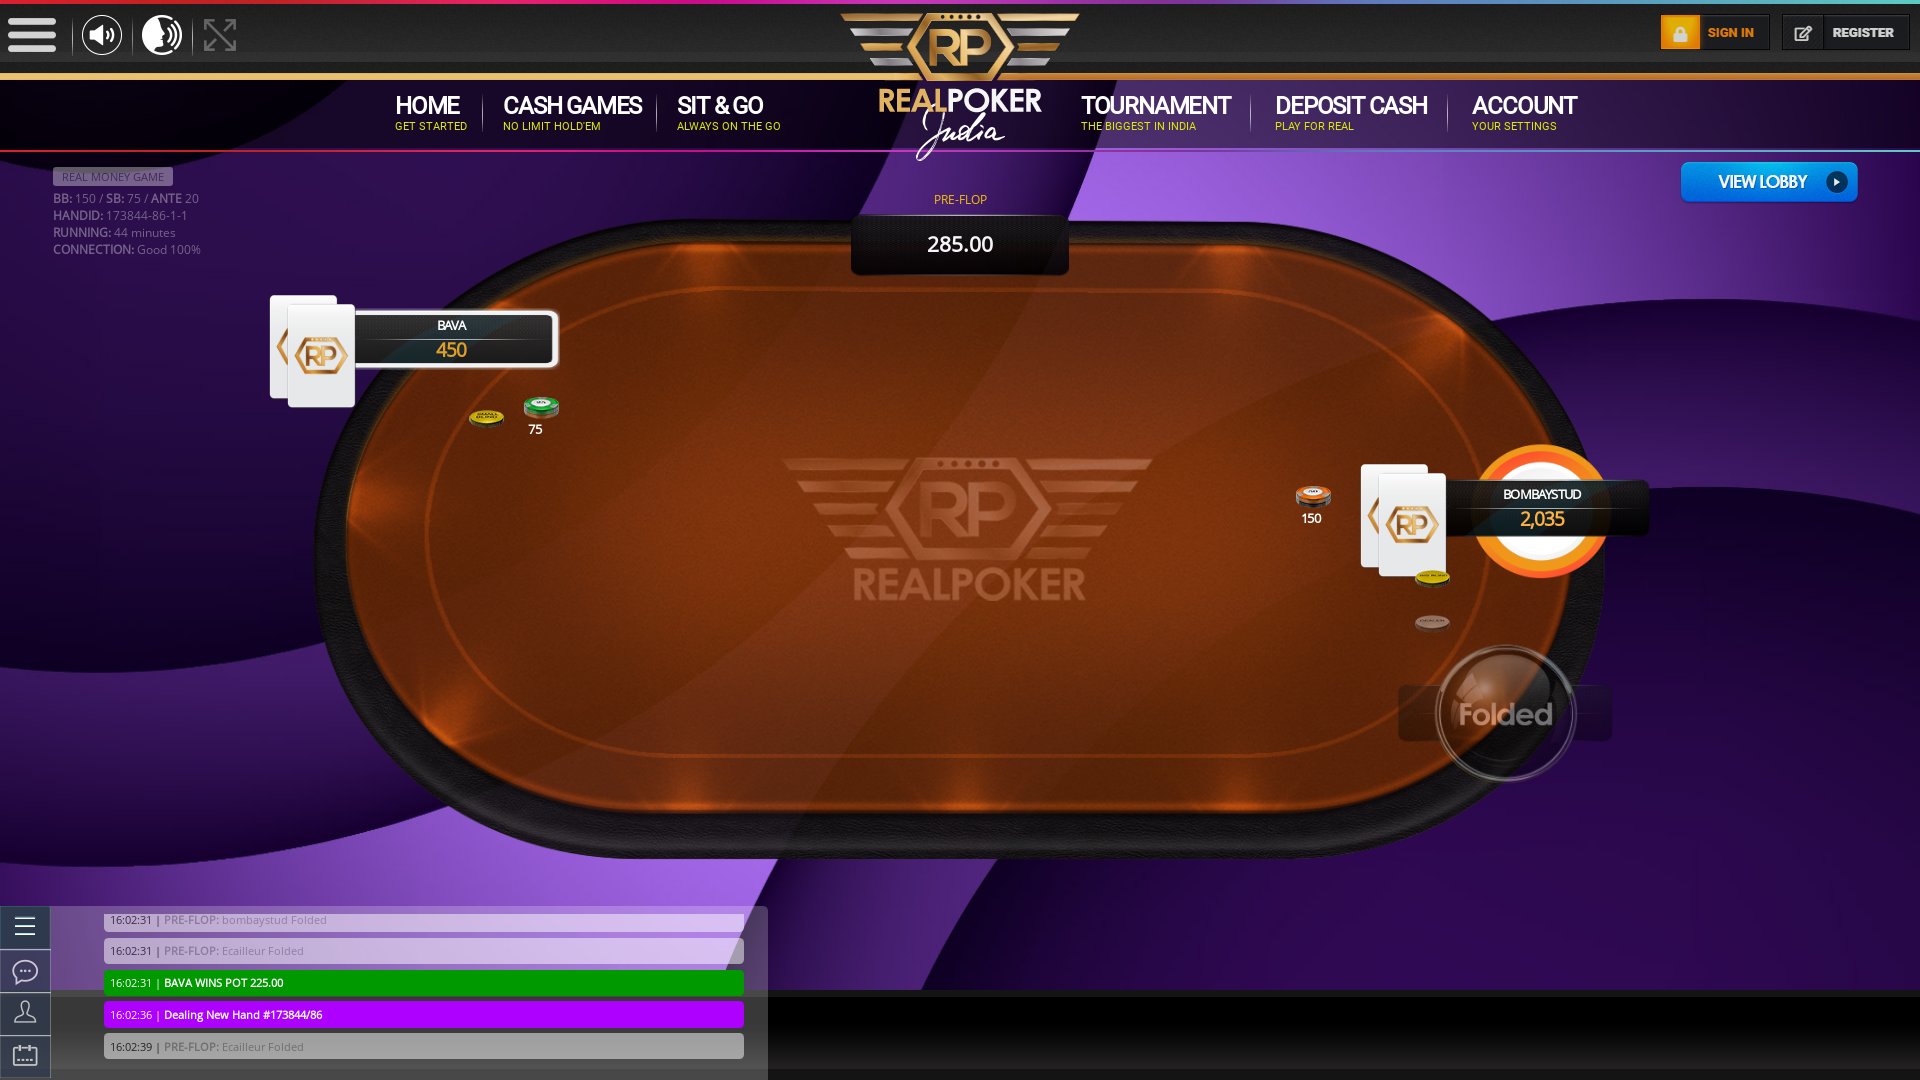 Real poker 10 player table in the 44th minute